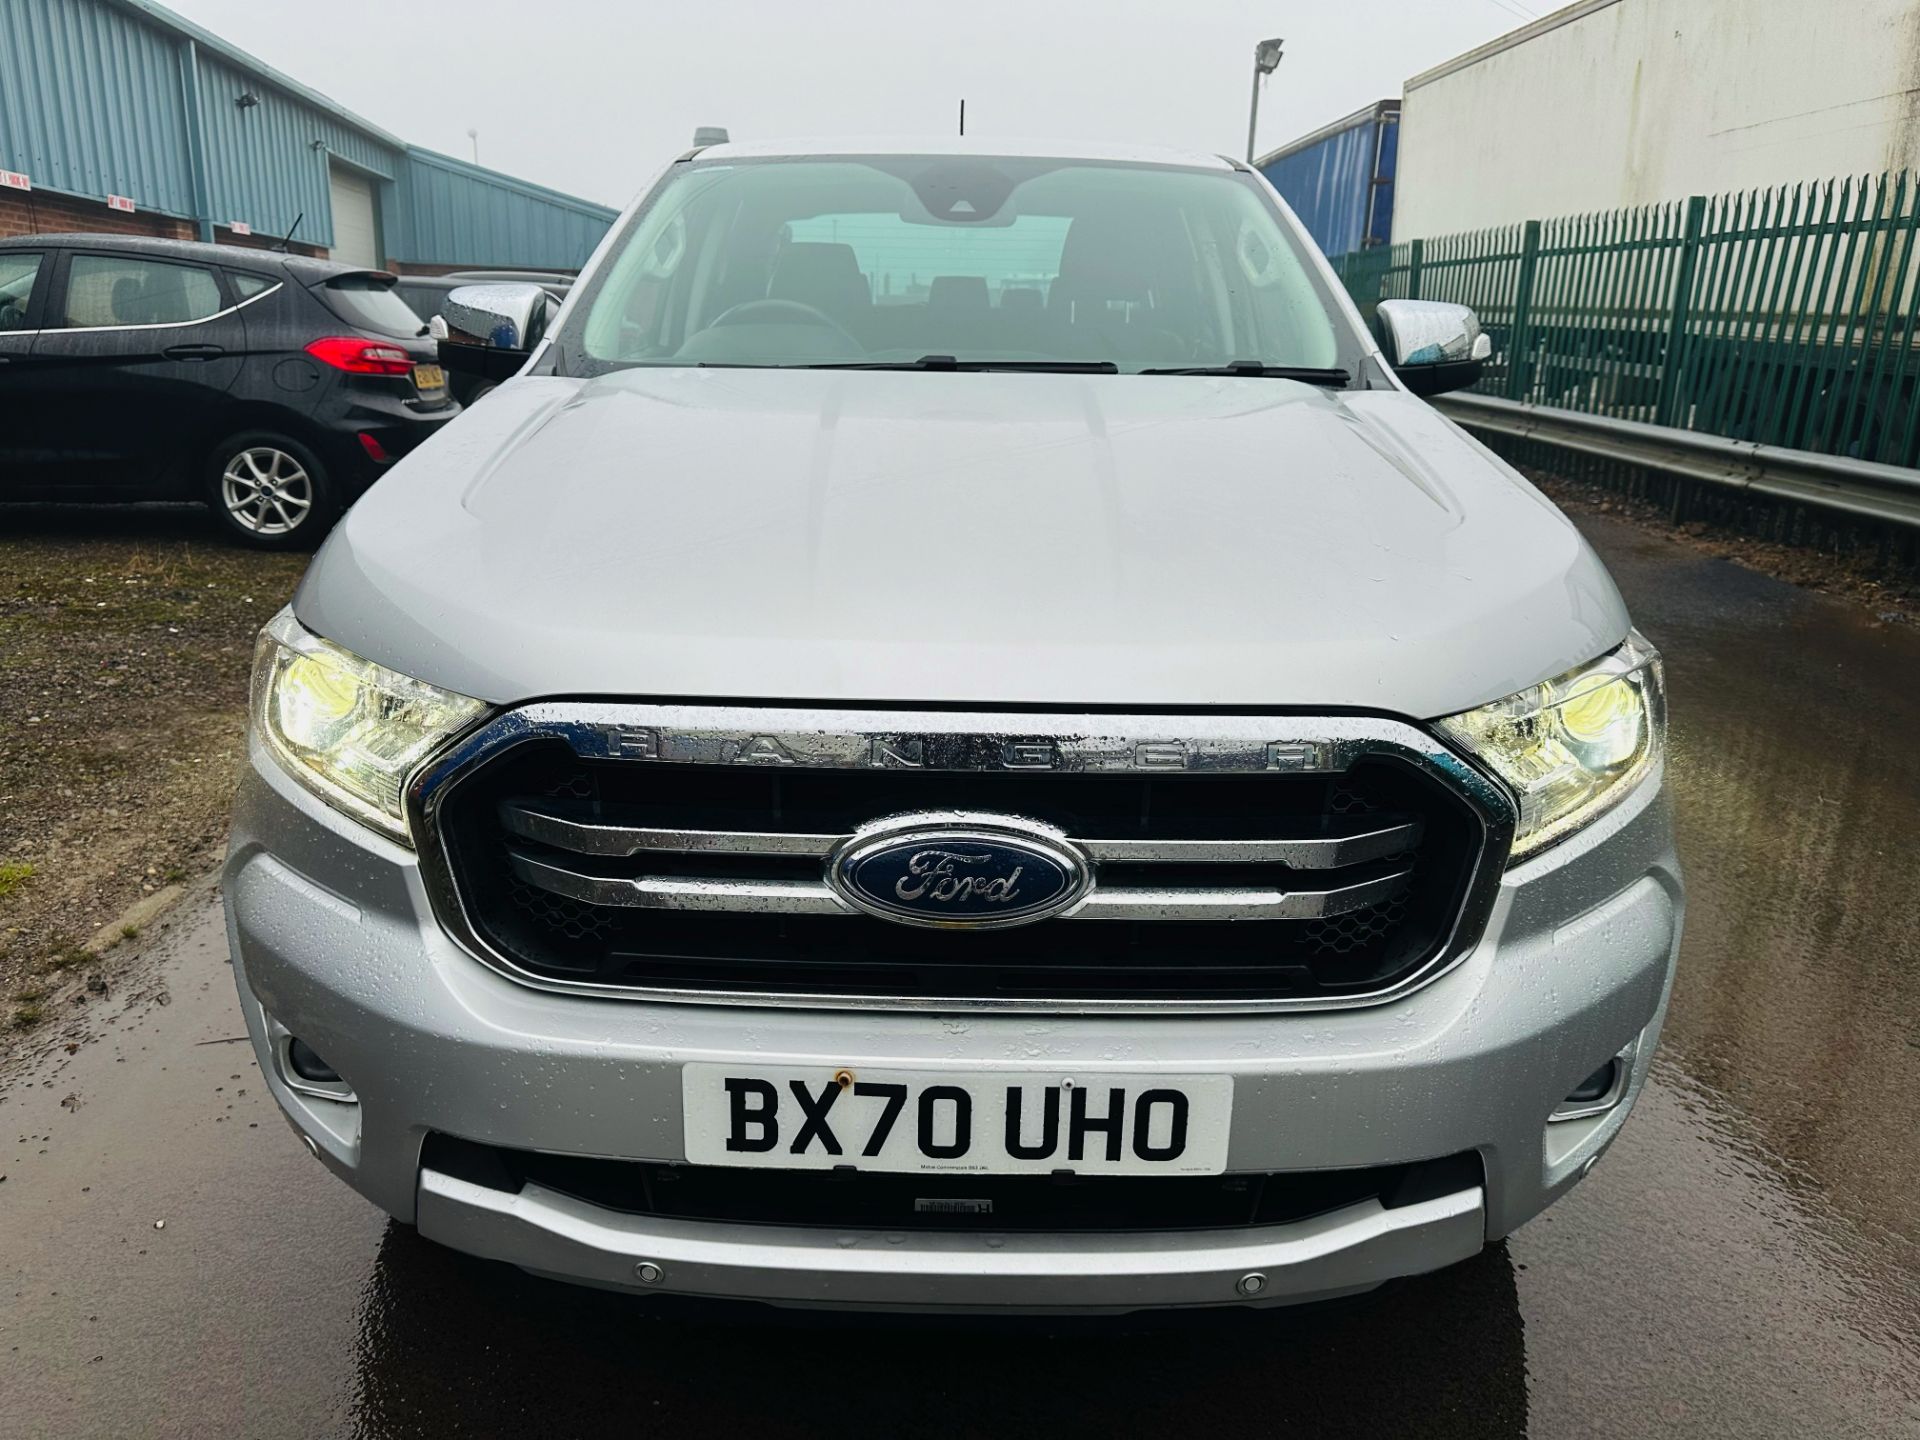 Ford Ranger 2.0 TDCI LIMITED 170BHP Auto SS (2021 Model) Huge Spec -Sat Nav Leather 35k Miles Only - Image 4 of 44